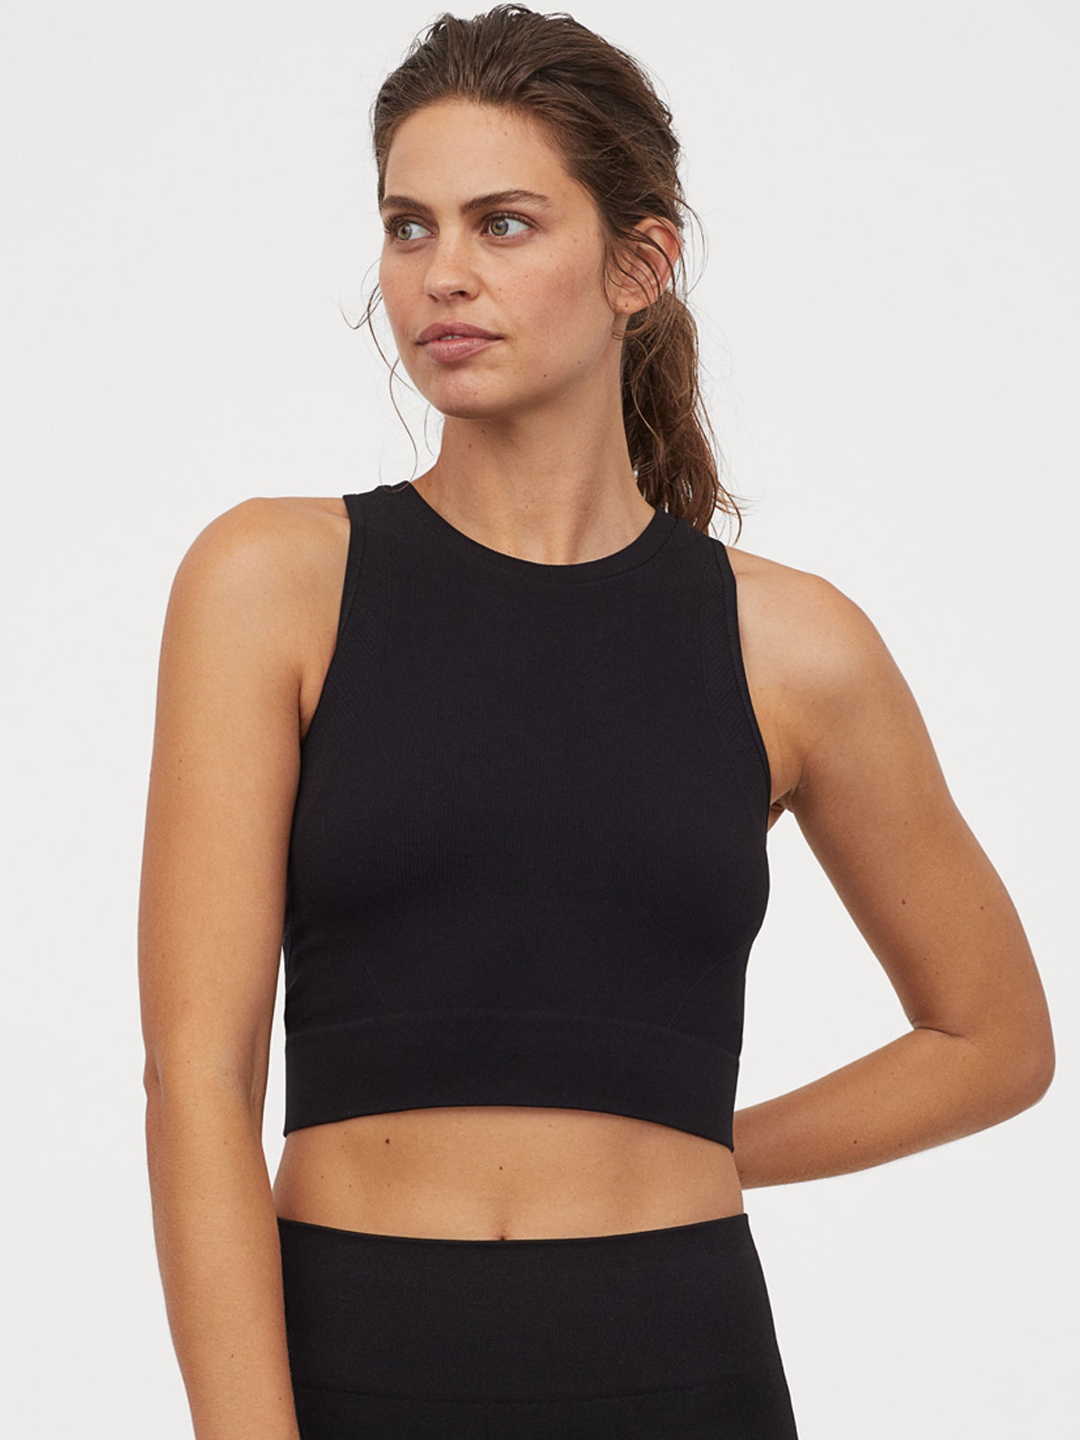 Buy H&M Women Black Solid Seamless Sports Crop Top - Tops for Women ...